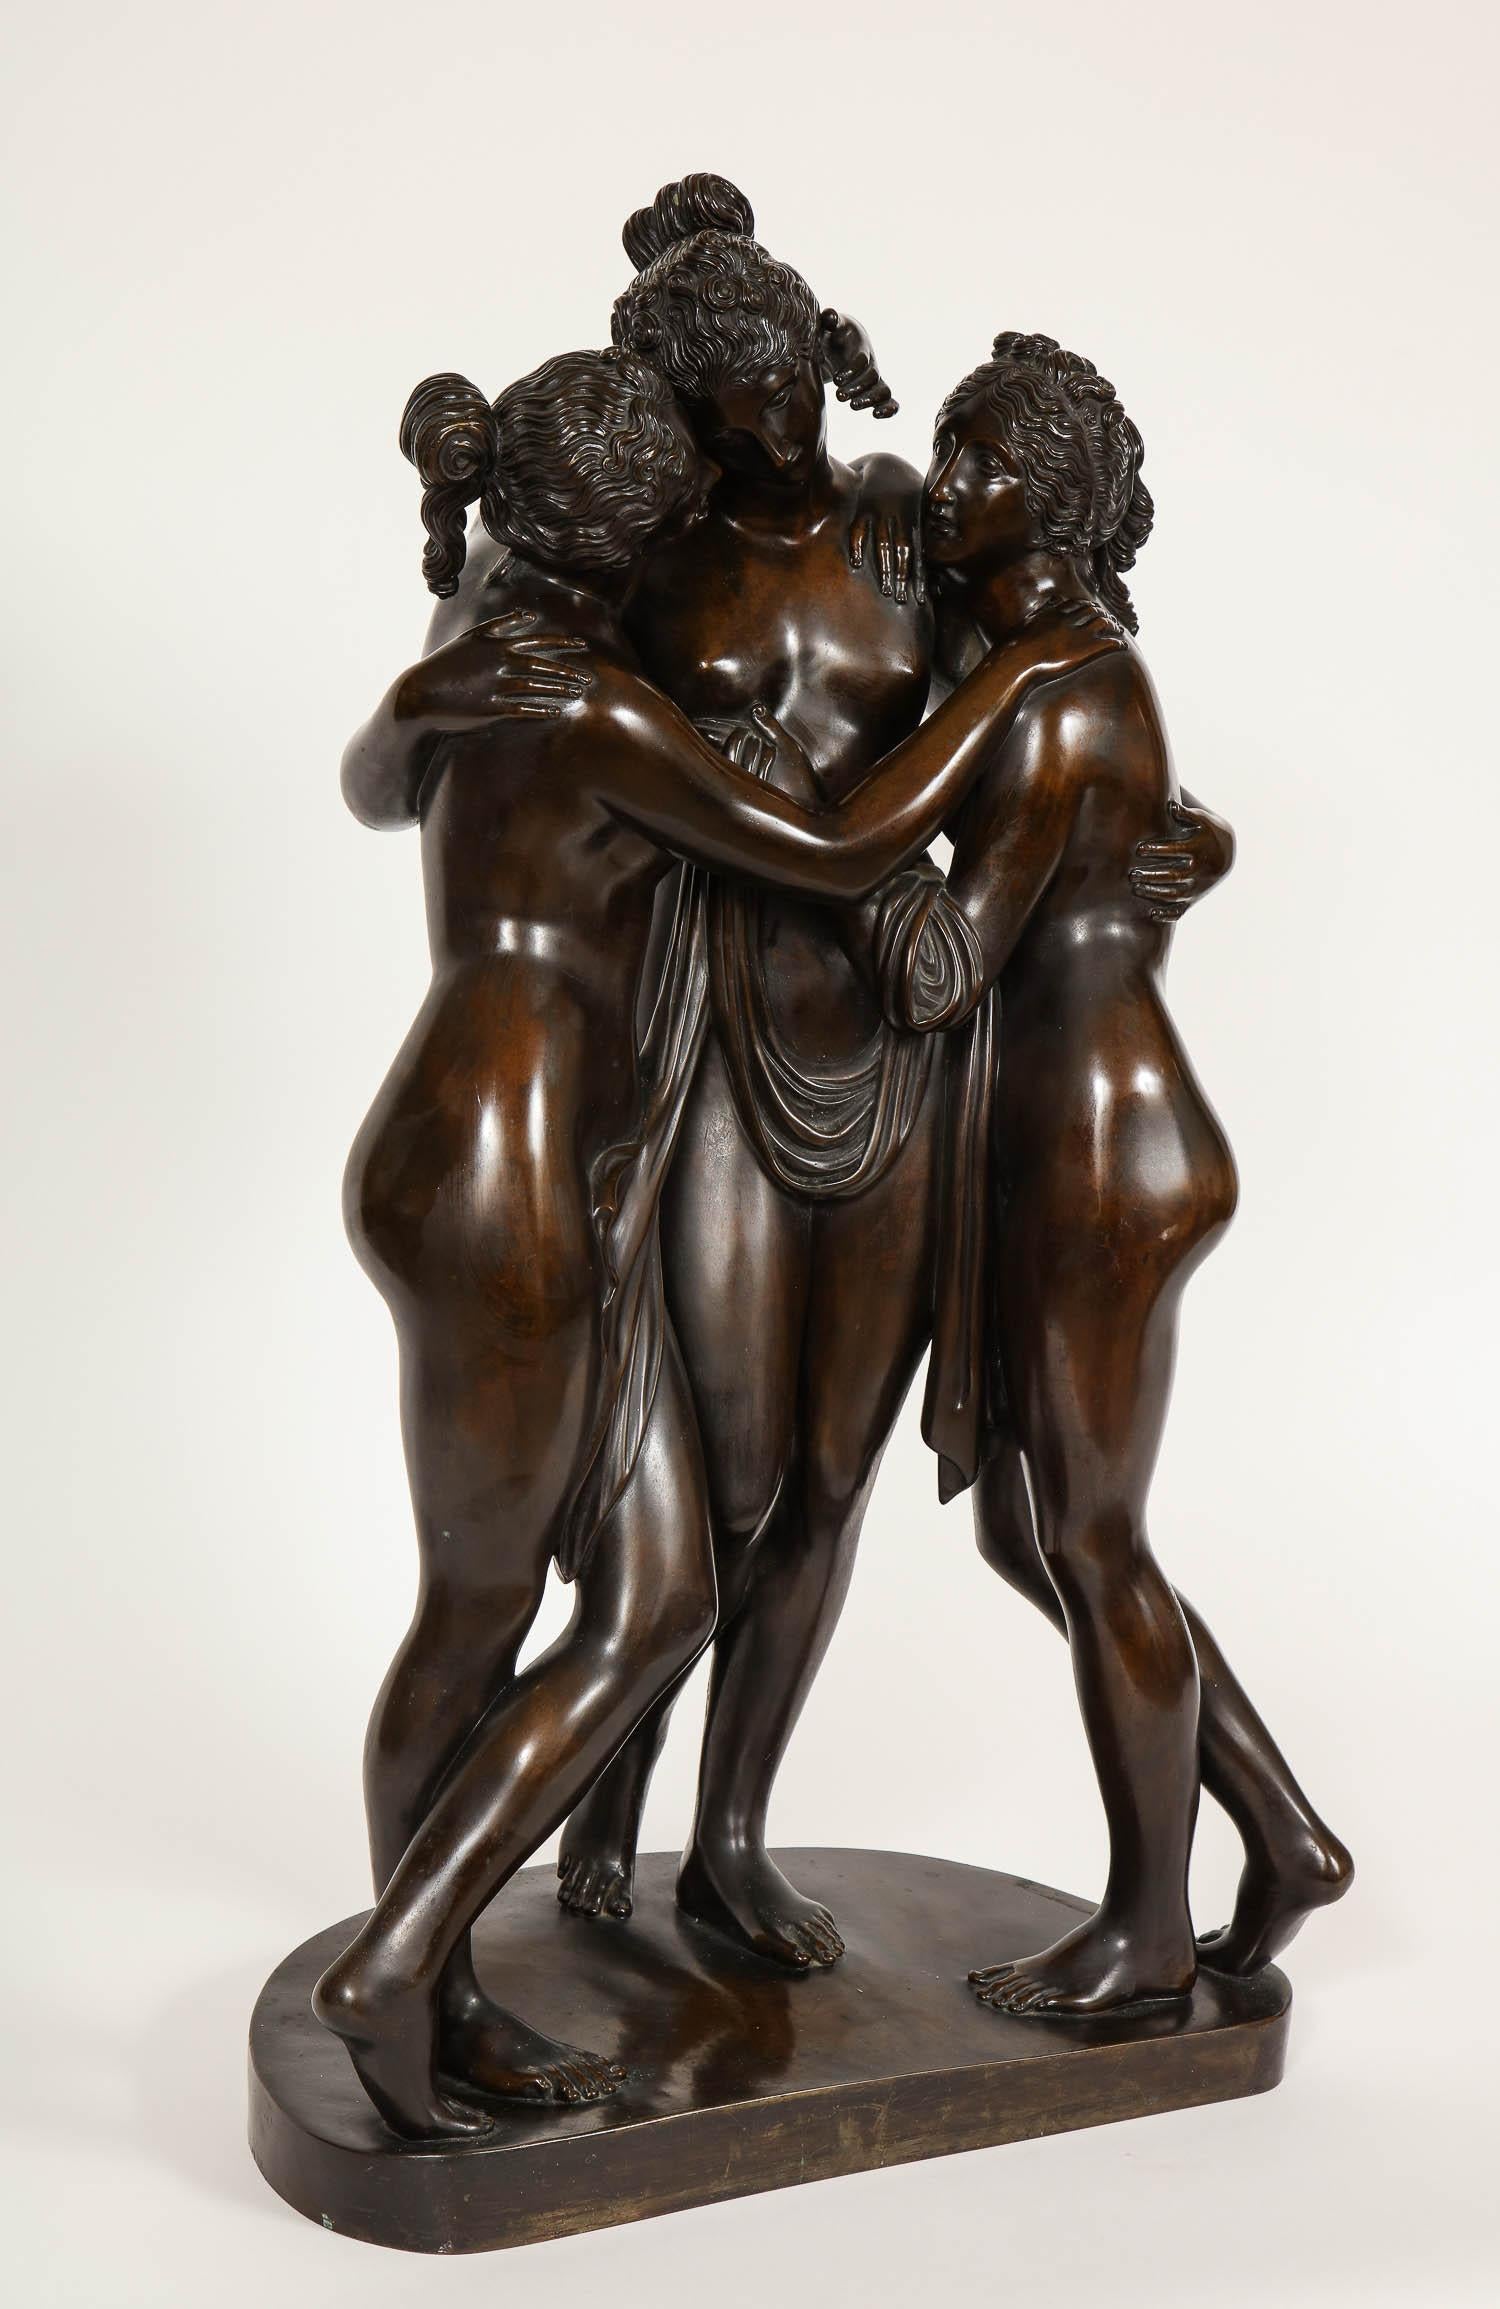 A very large and important bronze sculpture of the three graces, after Antonio Canova. This magnificent sculpture portrays the famous Three Graces by Canova in finely casted and hand-chiselled bronze with brown patina. They are a serene group that